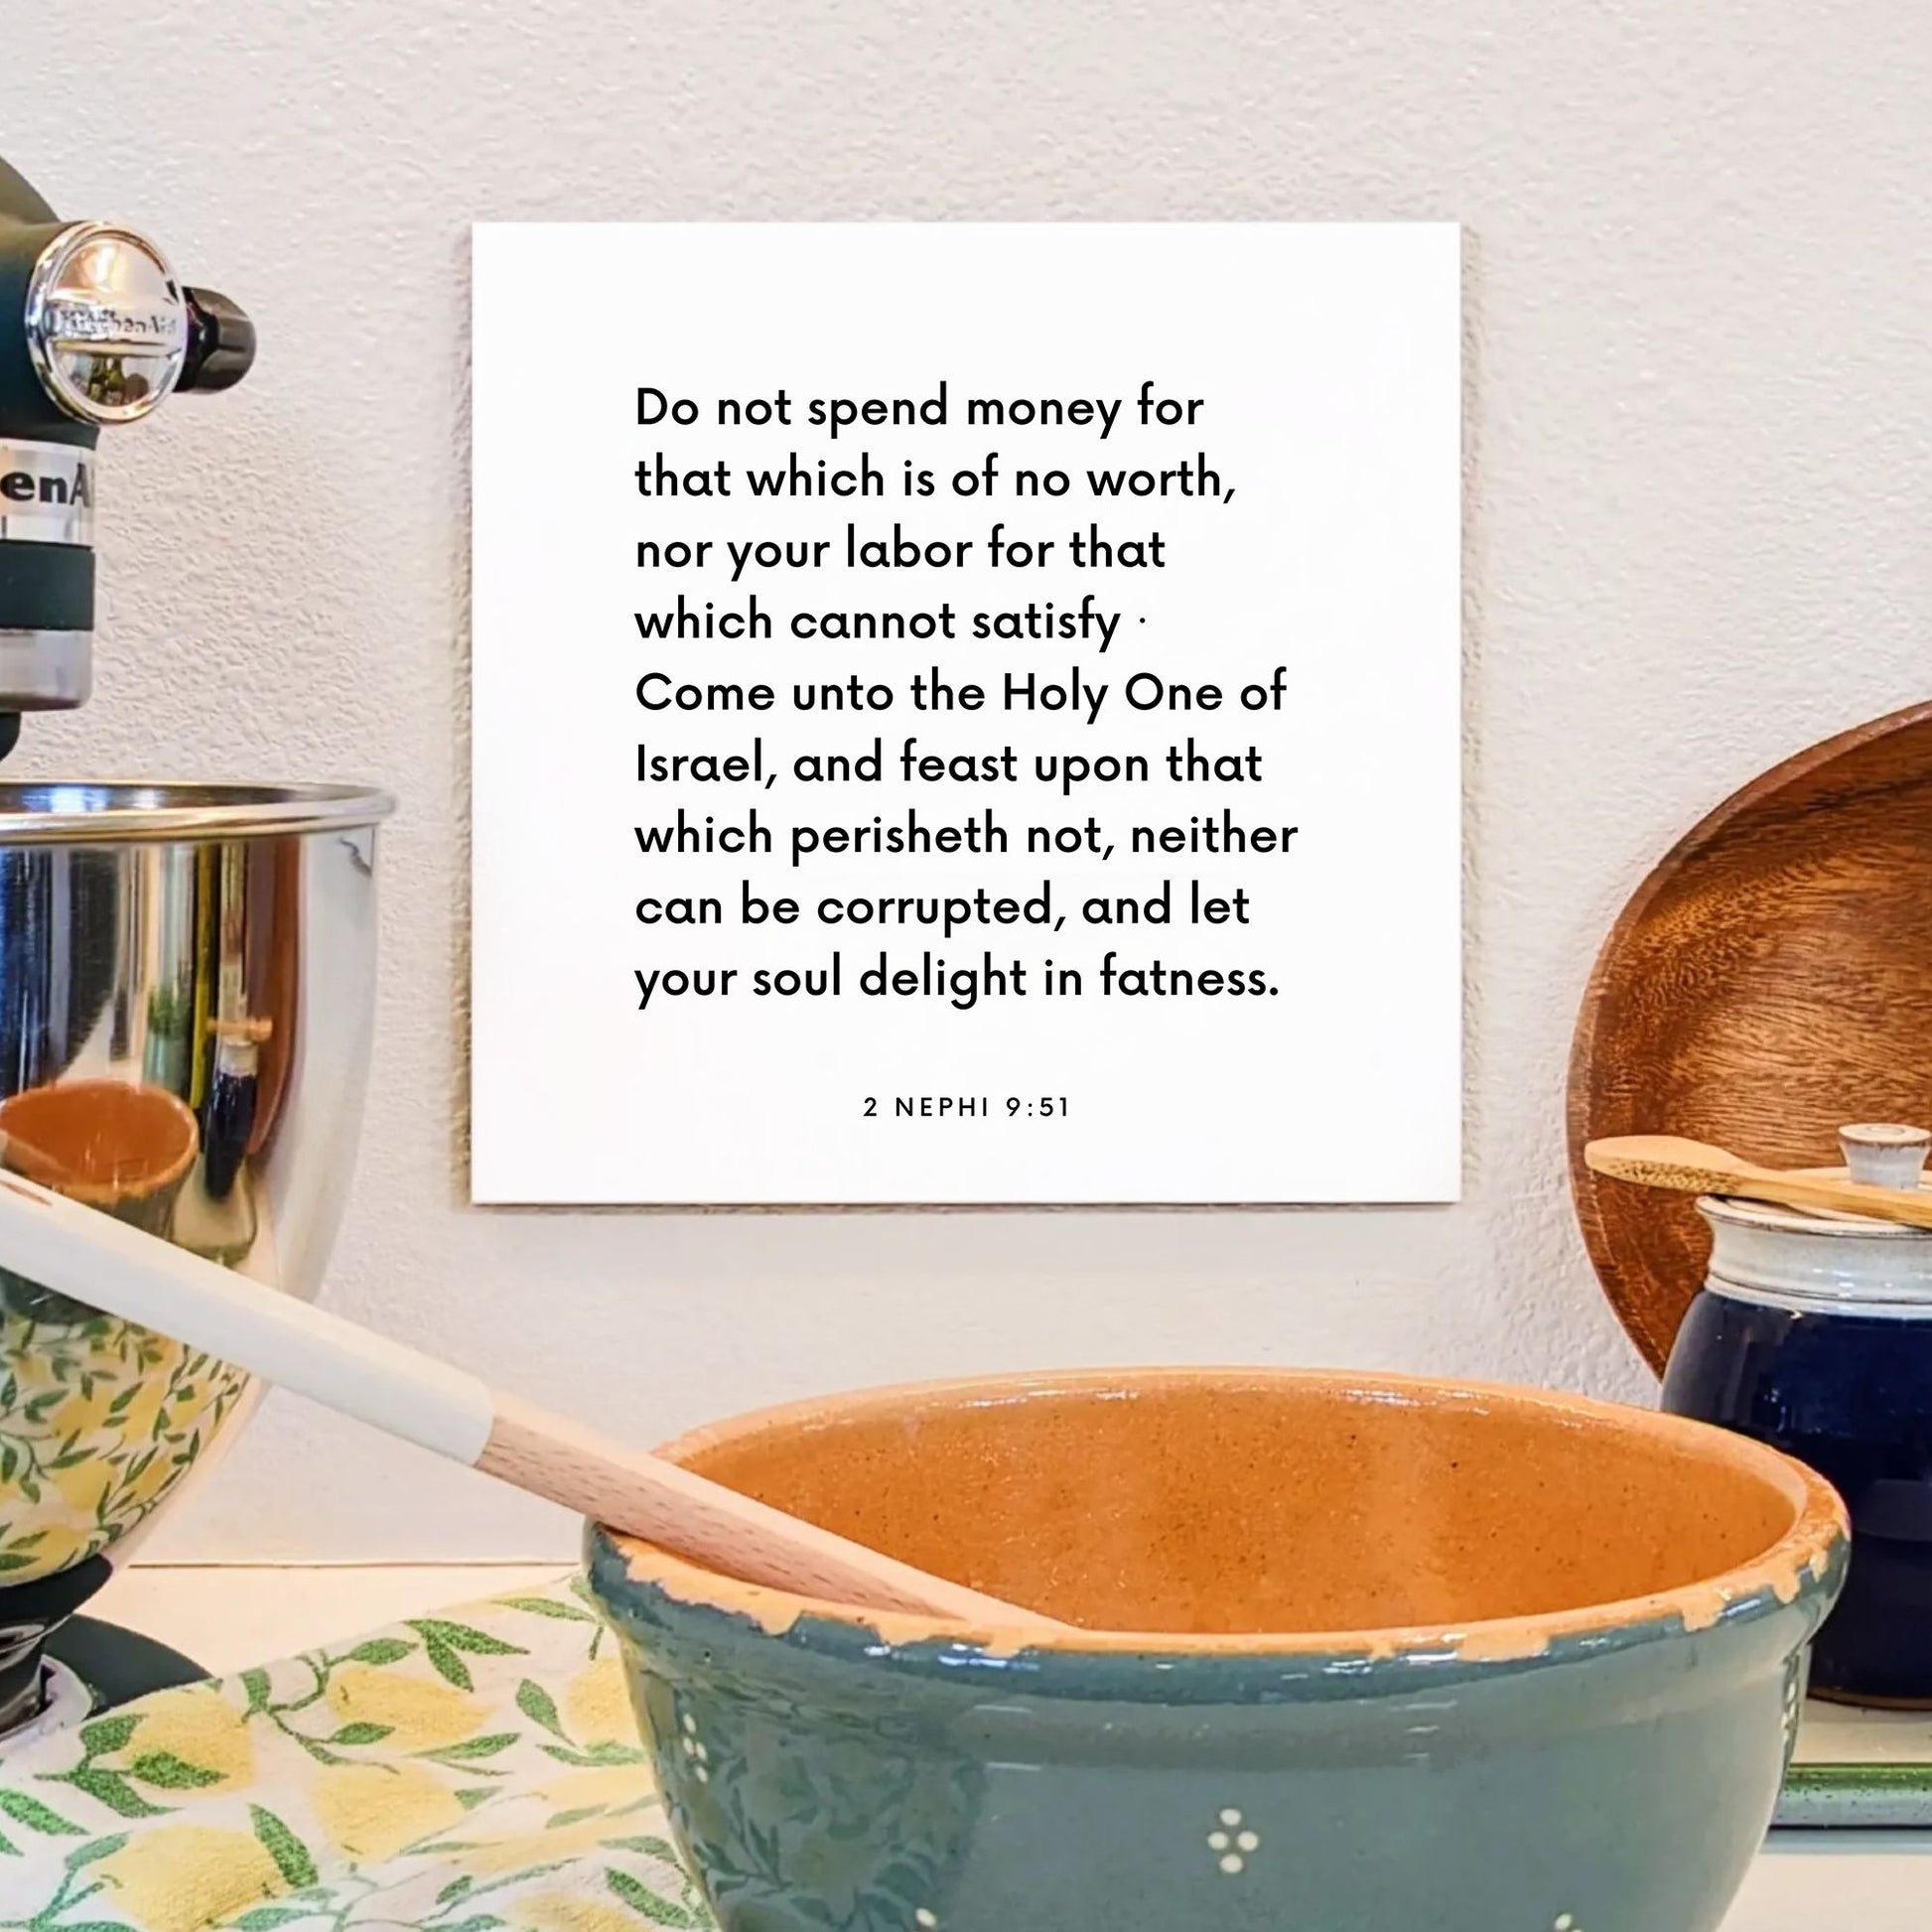 Kitchen mouting of the scripture tile for 2 Nephi 9:51 - "Do not spend money for that which is of no worth"